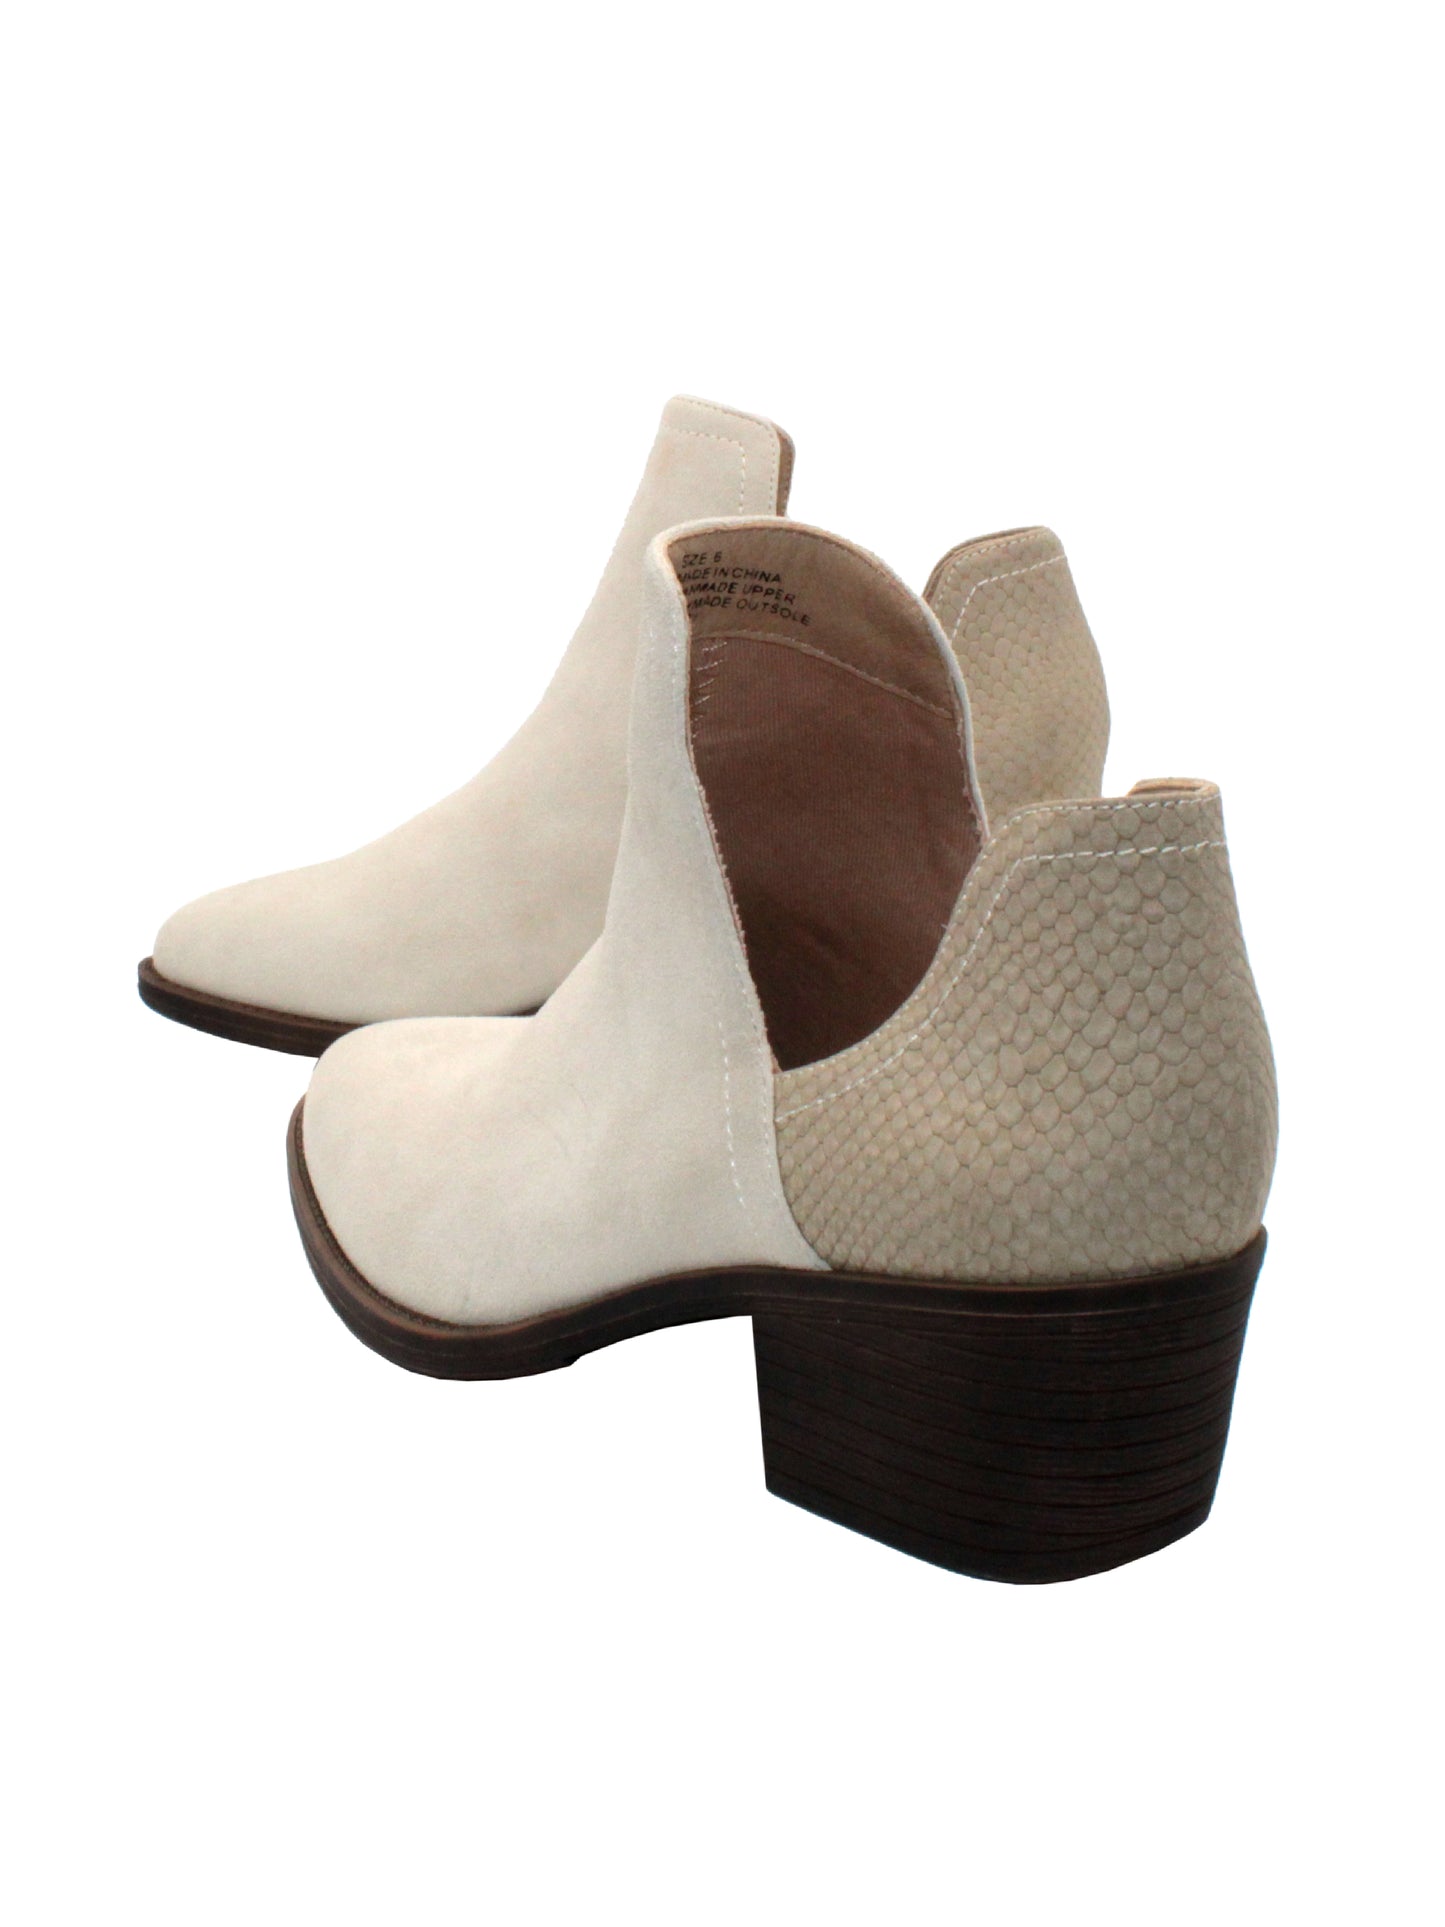 Our fan favorite CHRONICLE bootie by Volatile has been crafted in exotic materials, embossed faux croco or multicolored faux snake, for the new fall season. The upper features an attractive open shank that complement dresses and jeans alike. The padded insole is stationed atop a flexible and sturdy rubber outsole.